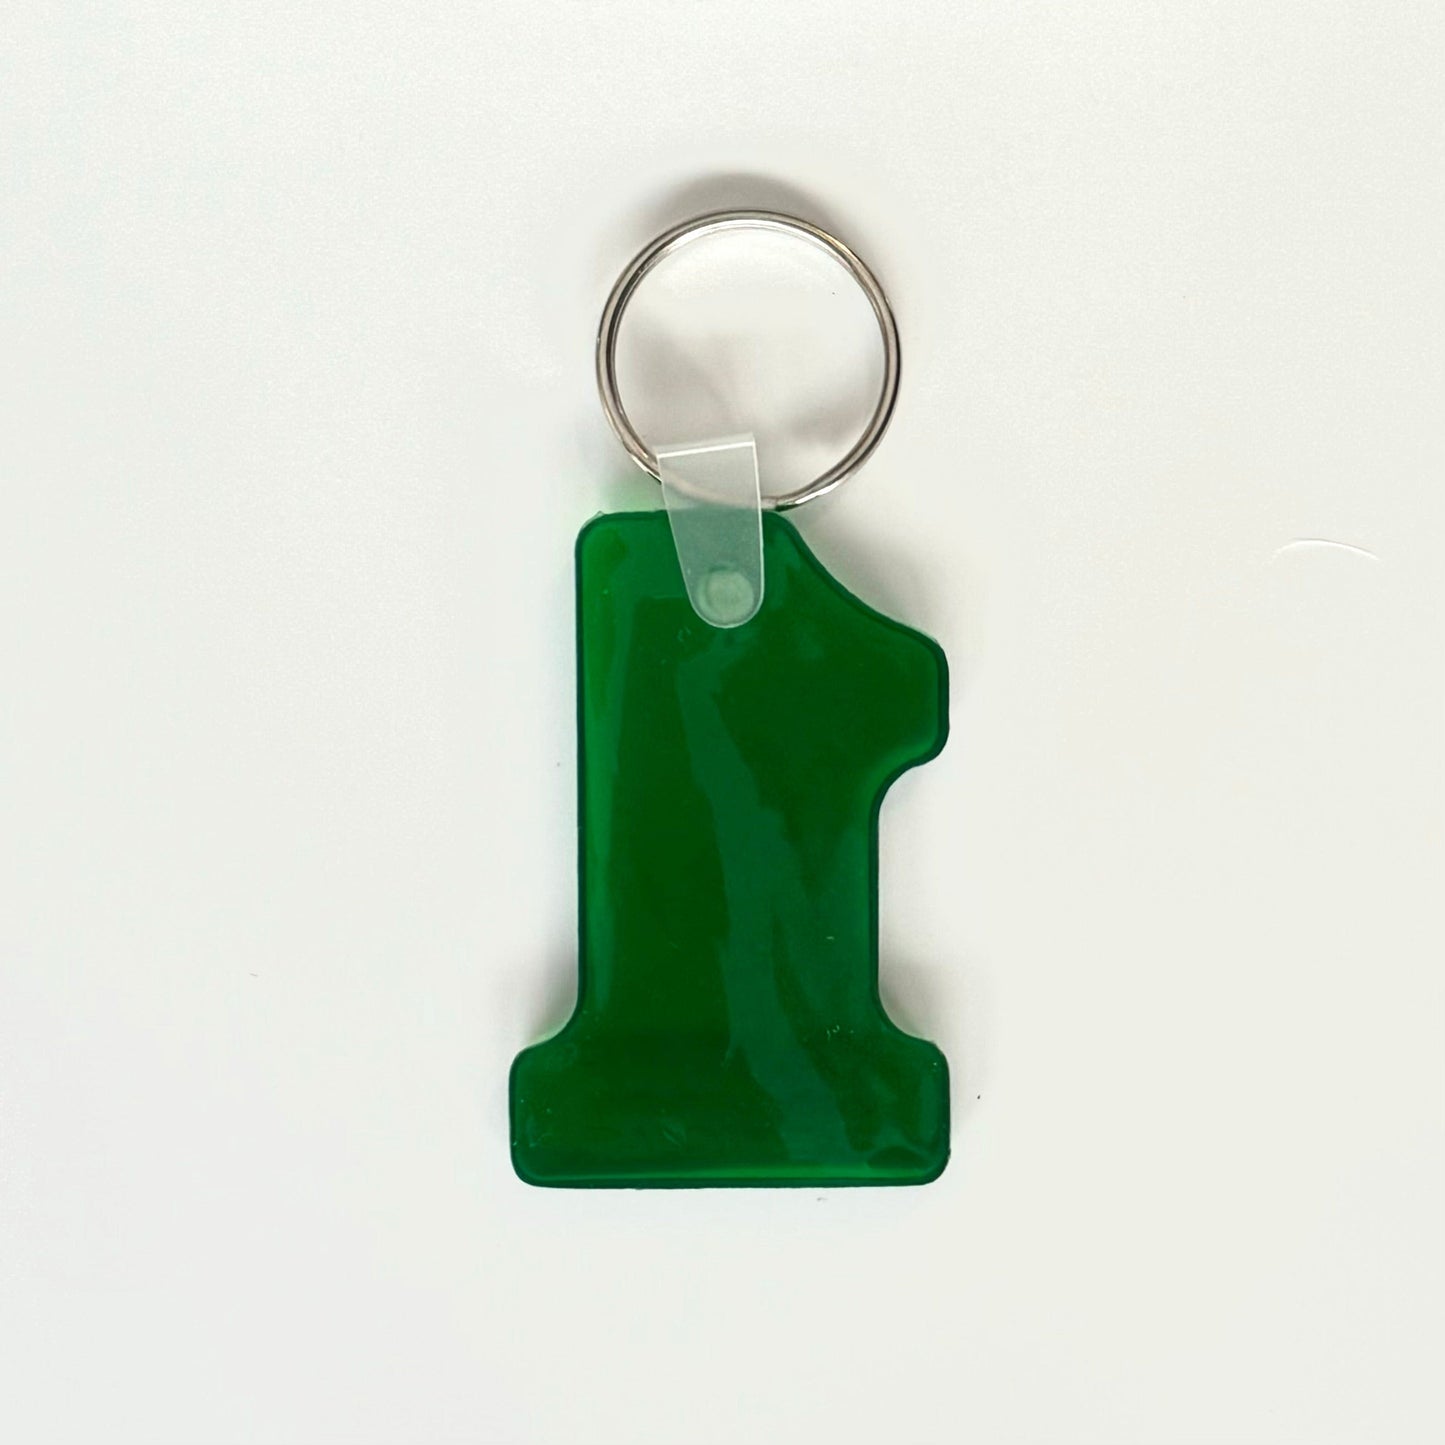 KAISER AGRICULTURAL CHEMICALS Keychain Key Ring Green #1 Rubber